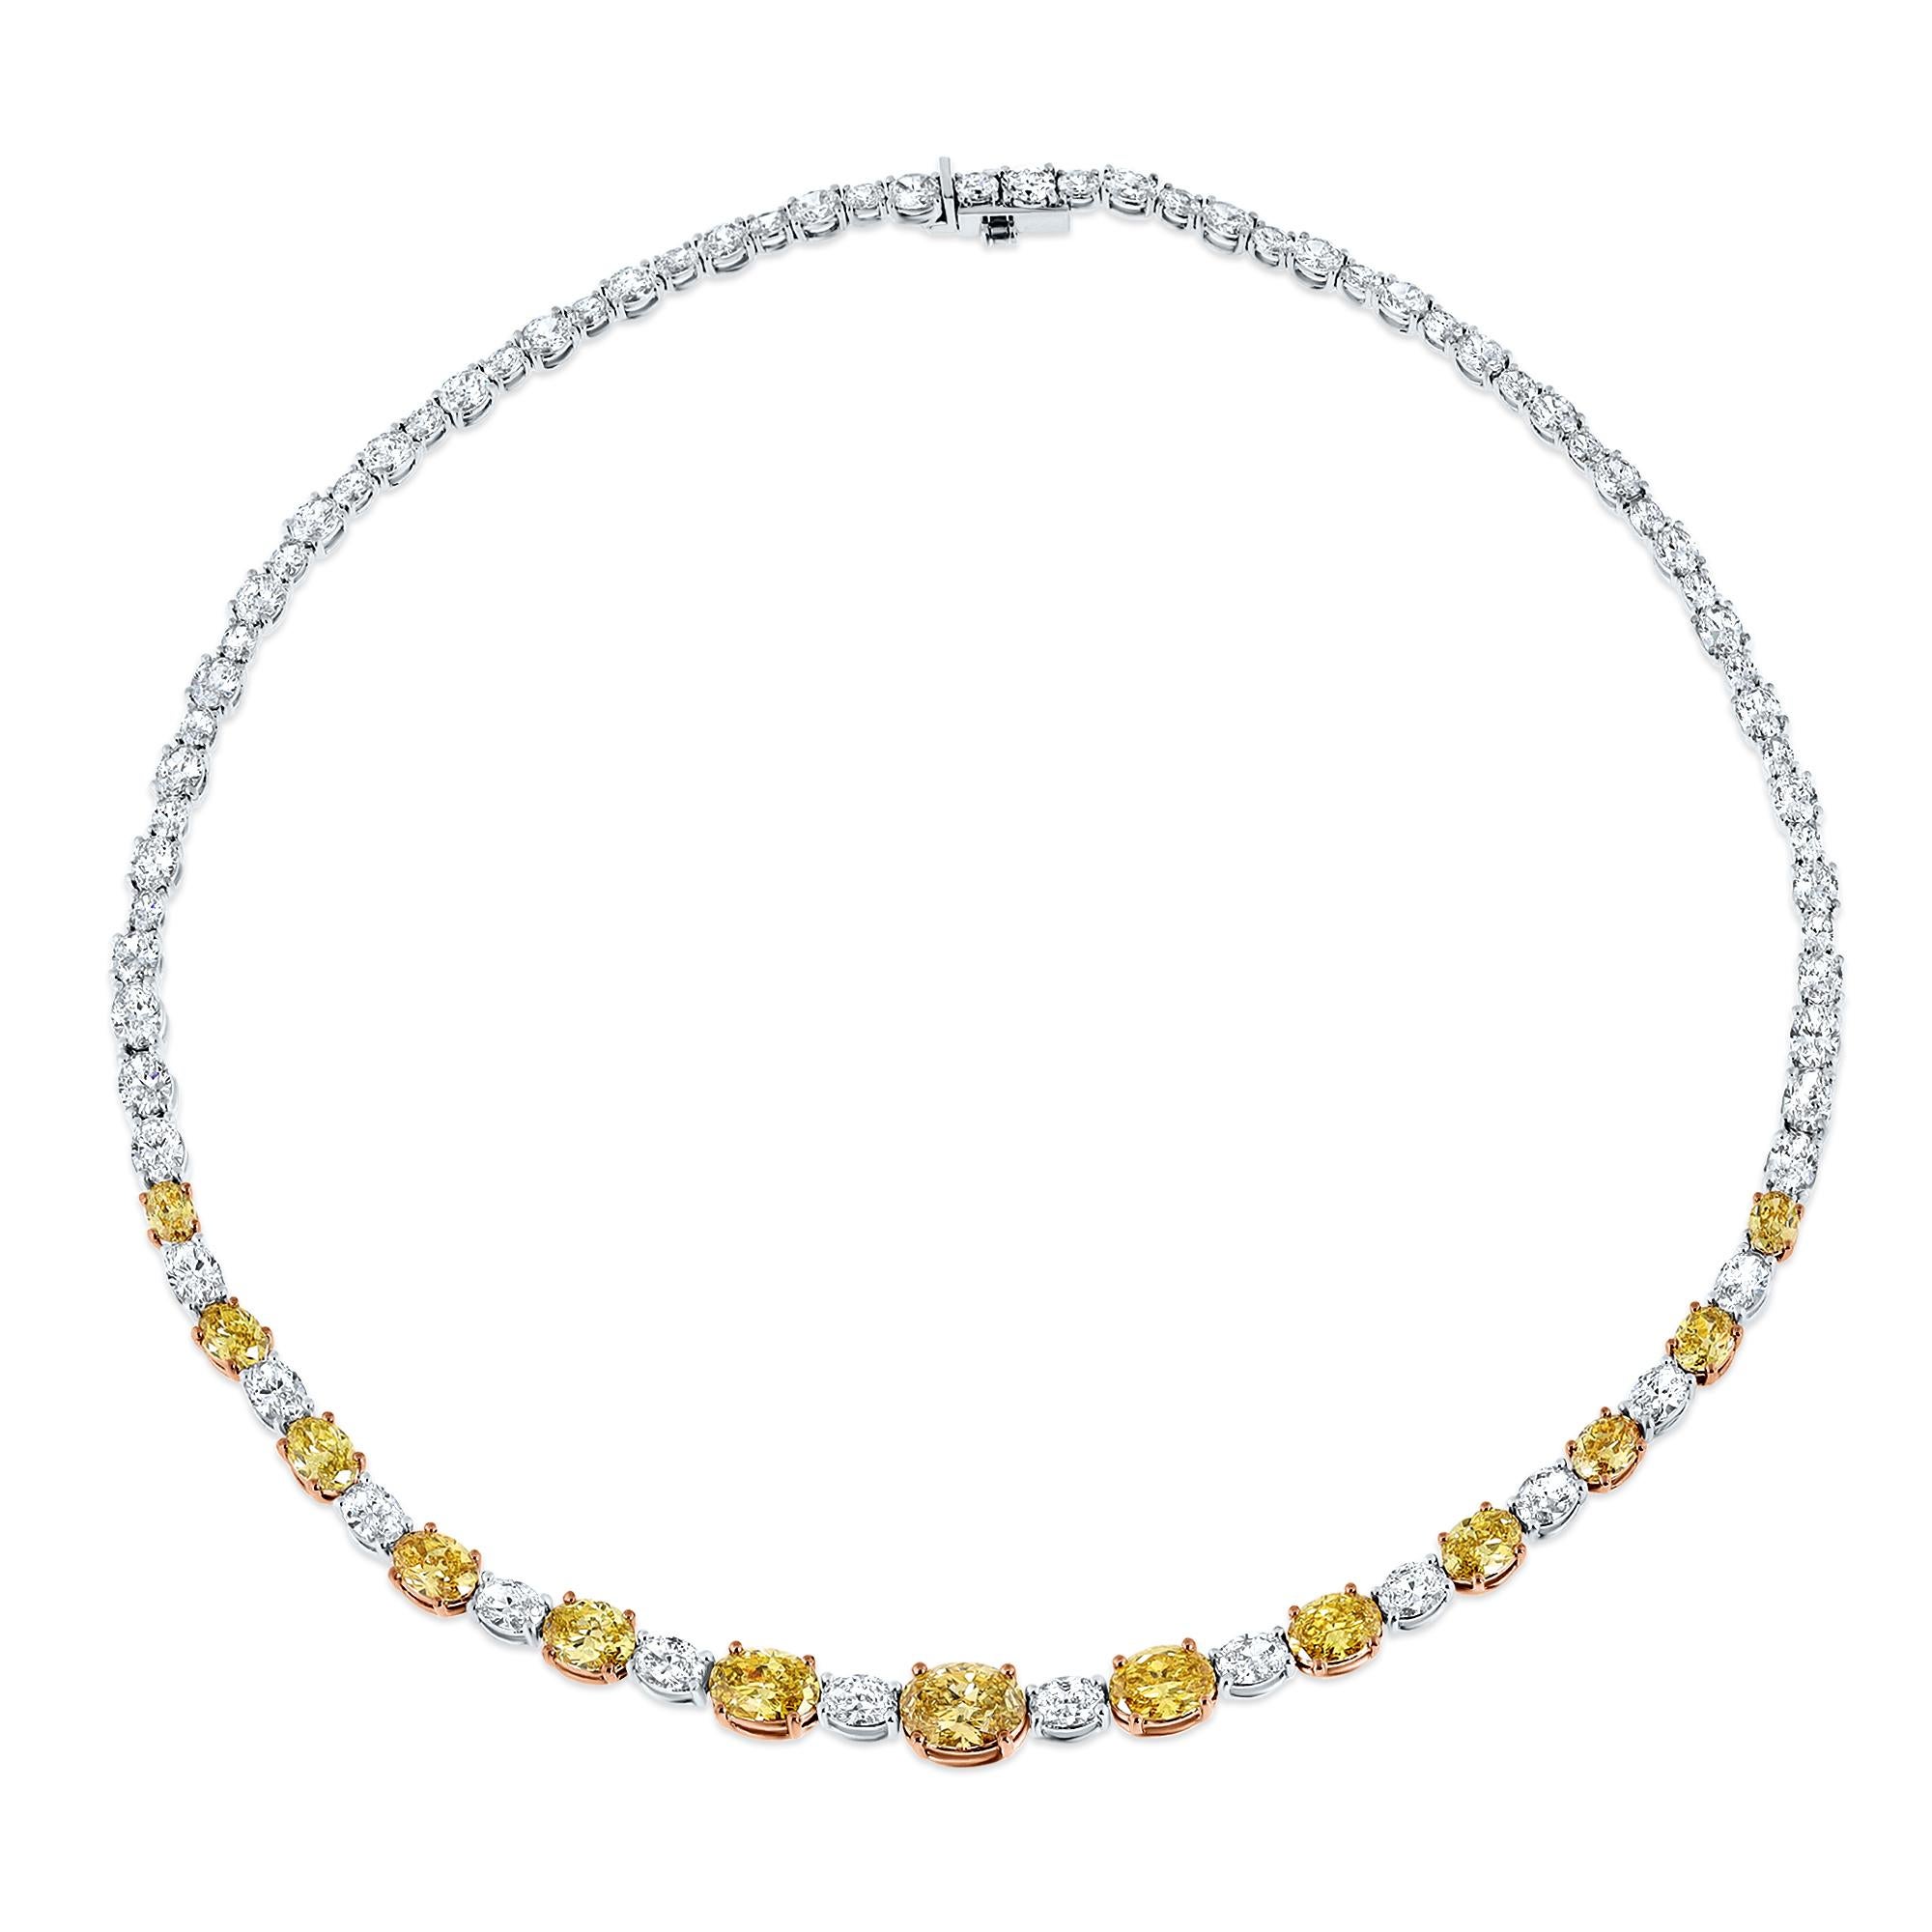 Introducing an enchanting diamond necklace fit for the red carpet, a gala, or a black-tie wedding. The luxurious combination of yellow and colorless diamonds in an oval cut is truly breathtaking and show-stopping. This exquisite piece features 13